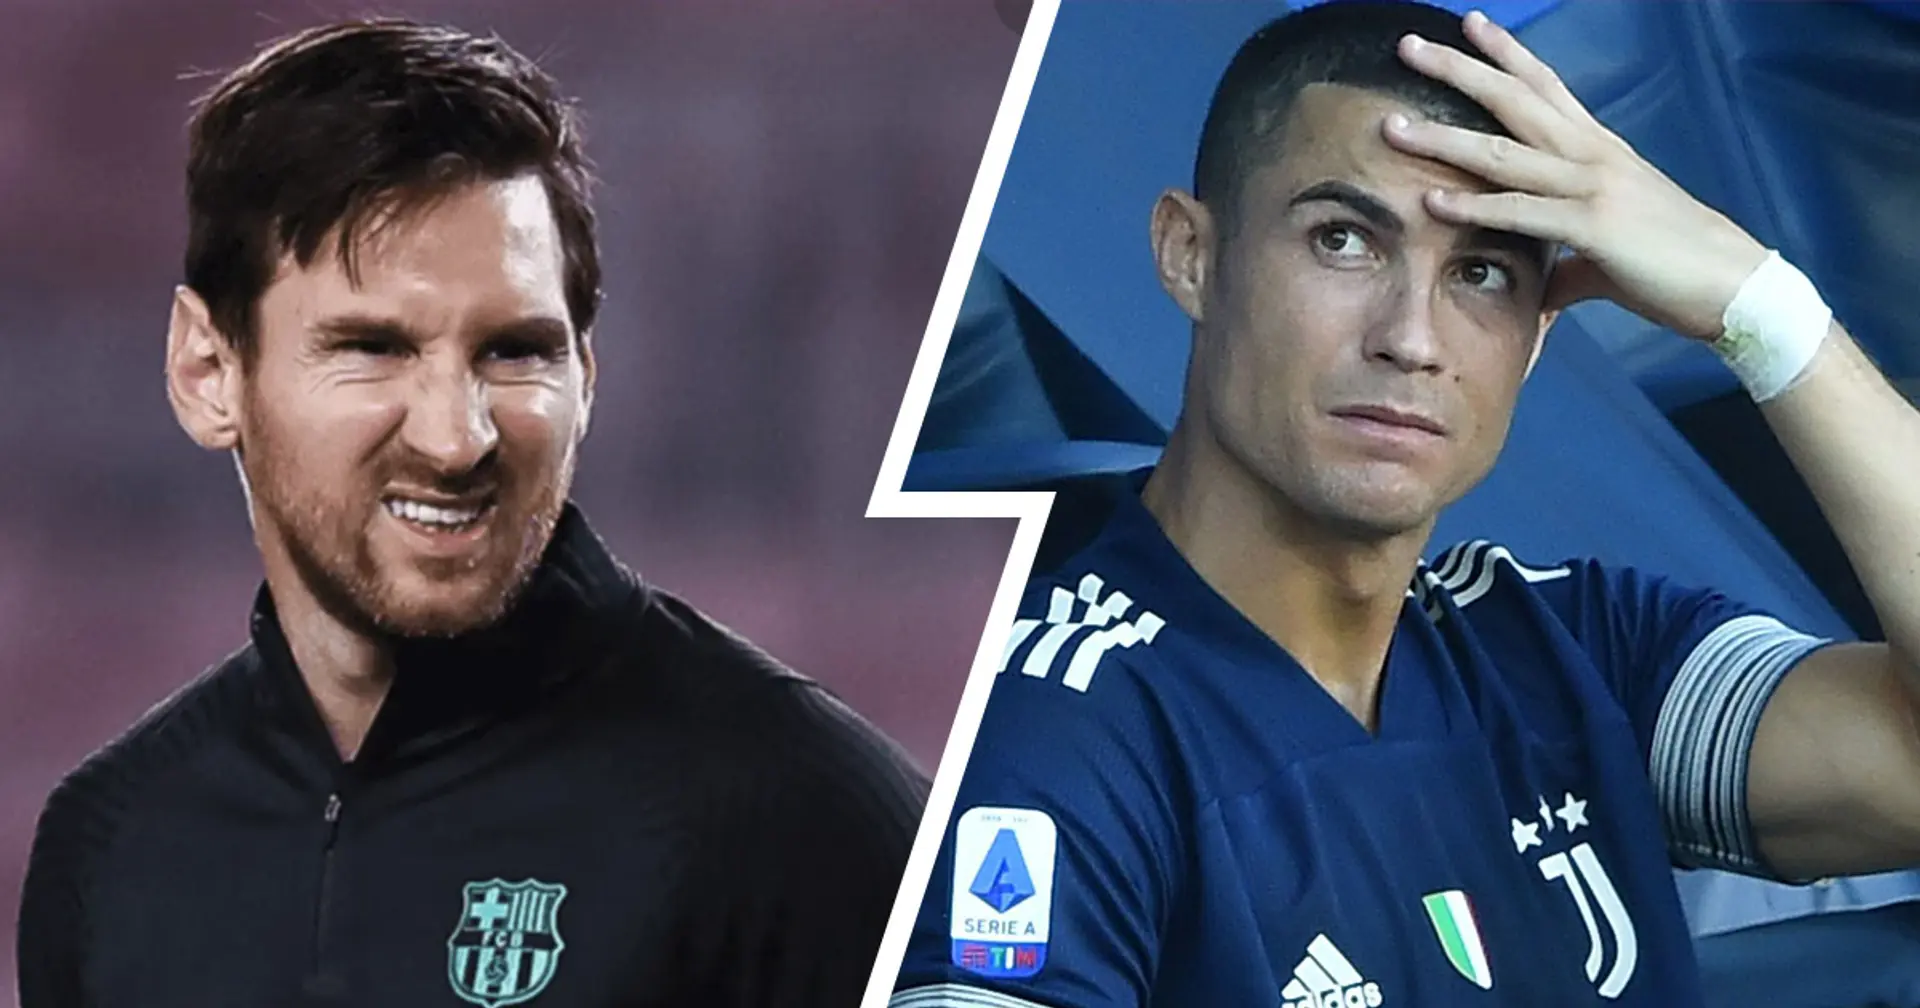 'Ronaldo best in the world by far? I feel you don't watch football': Cristiano fanboy dealt with in 5 paragraphs as he throws shade on Messi